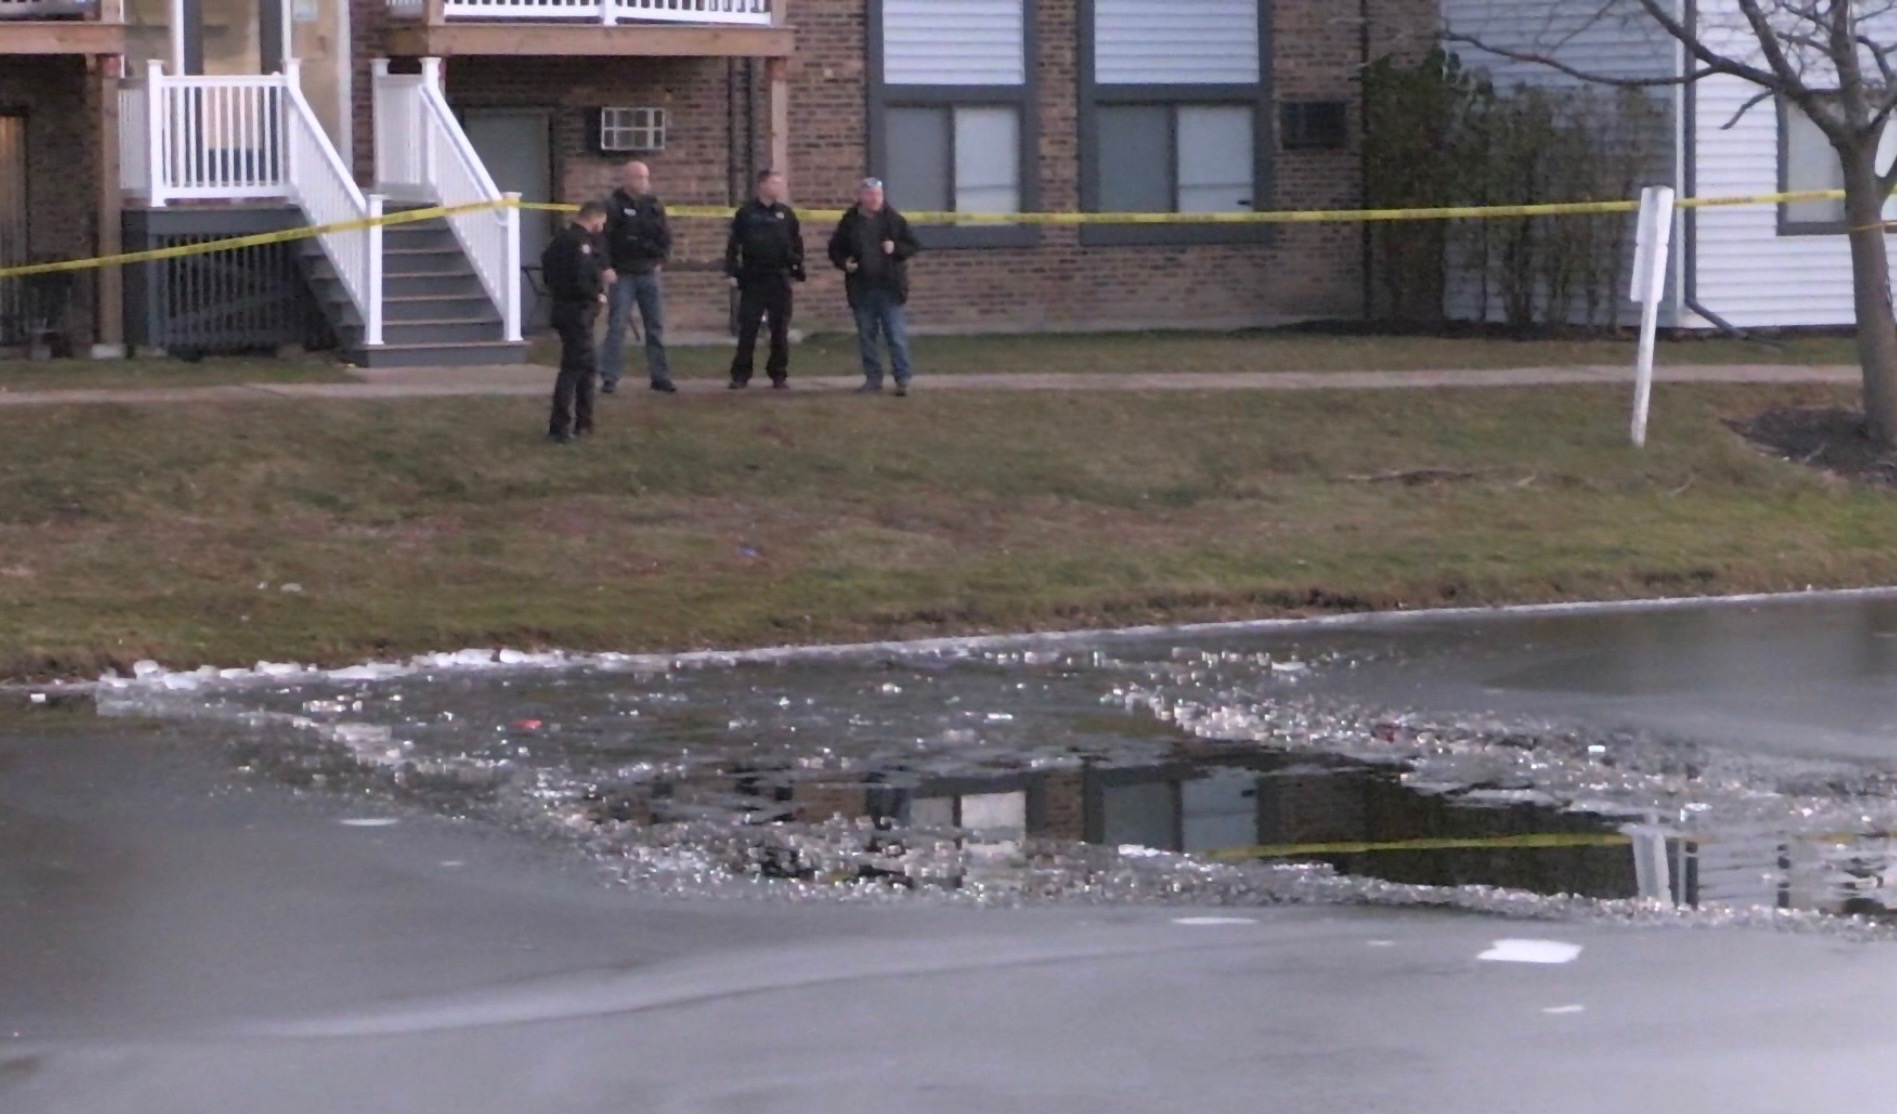 A hole in the ice were four young boys fell through into water at an apartment pond on Panorama Drive in Palatine (NorthShore Updates/CapturedNews)